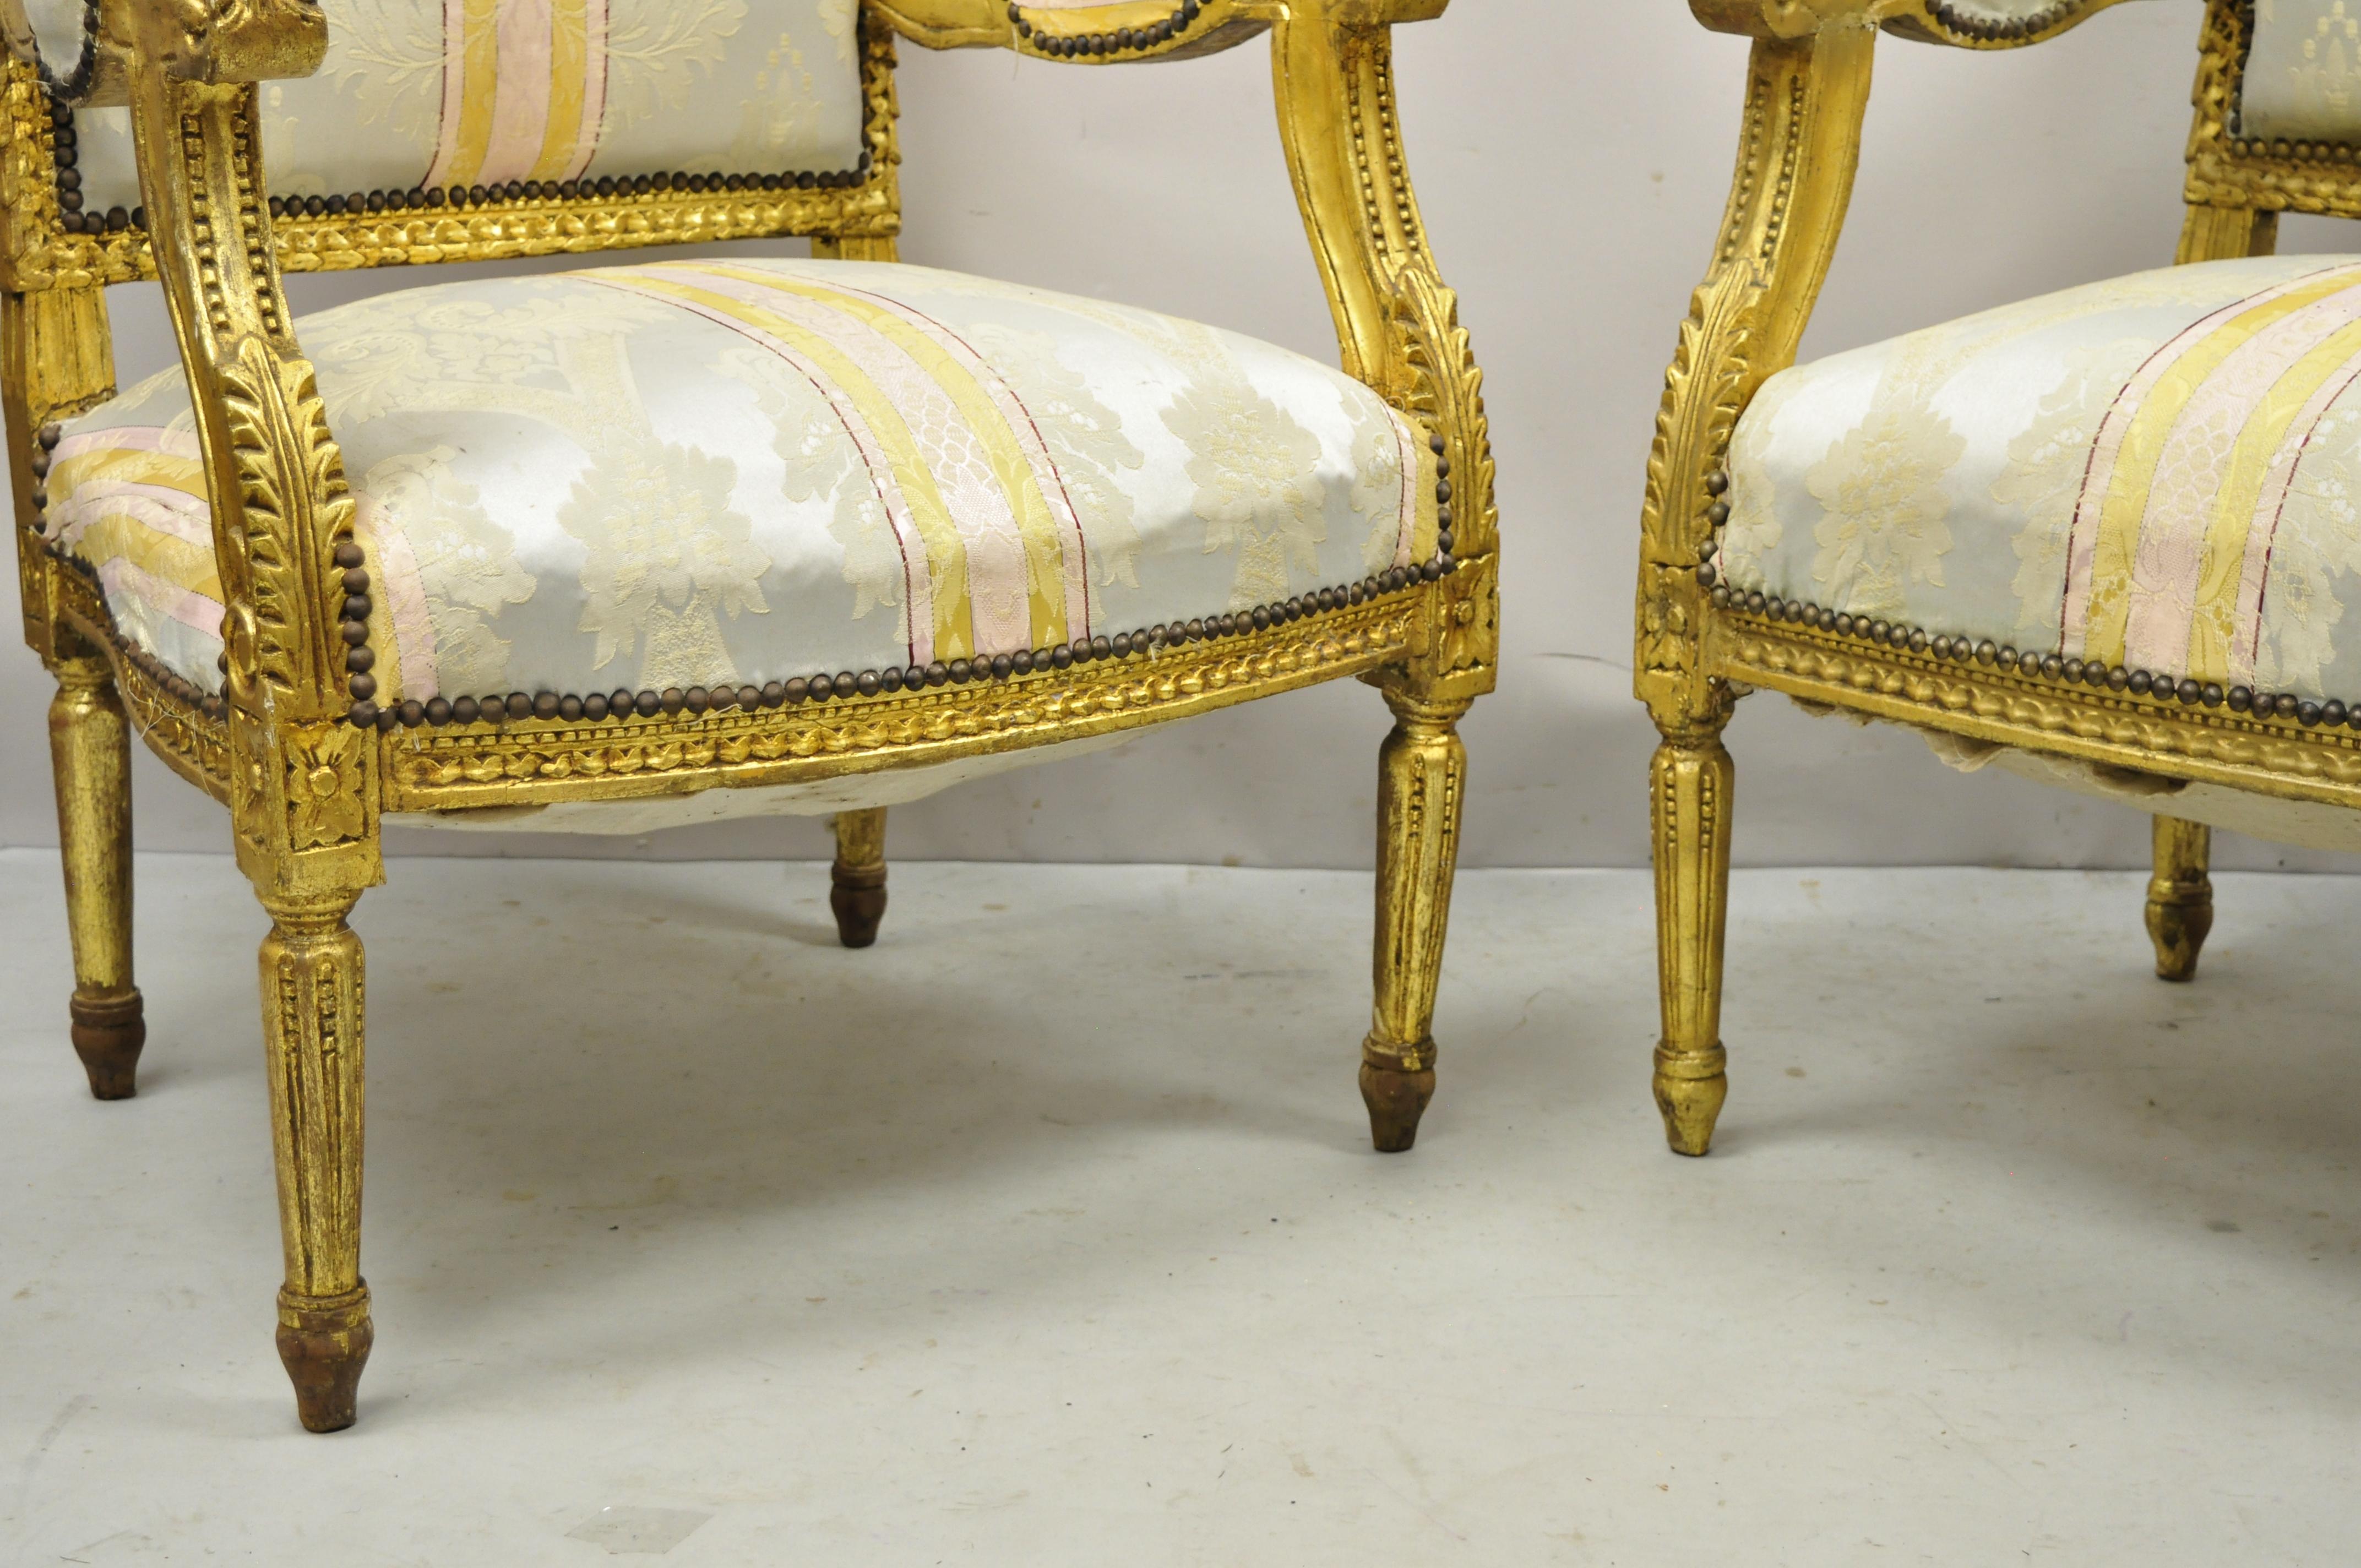 Fabric Vintage French Louis XVI Gold Giltwood Upholstered Lounge Chairs 'B', a Pair For Sale